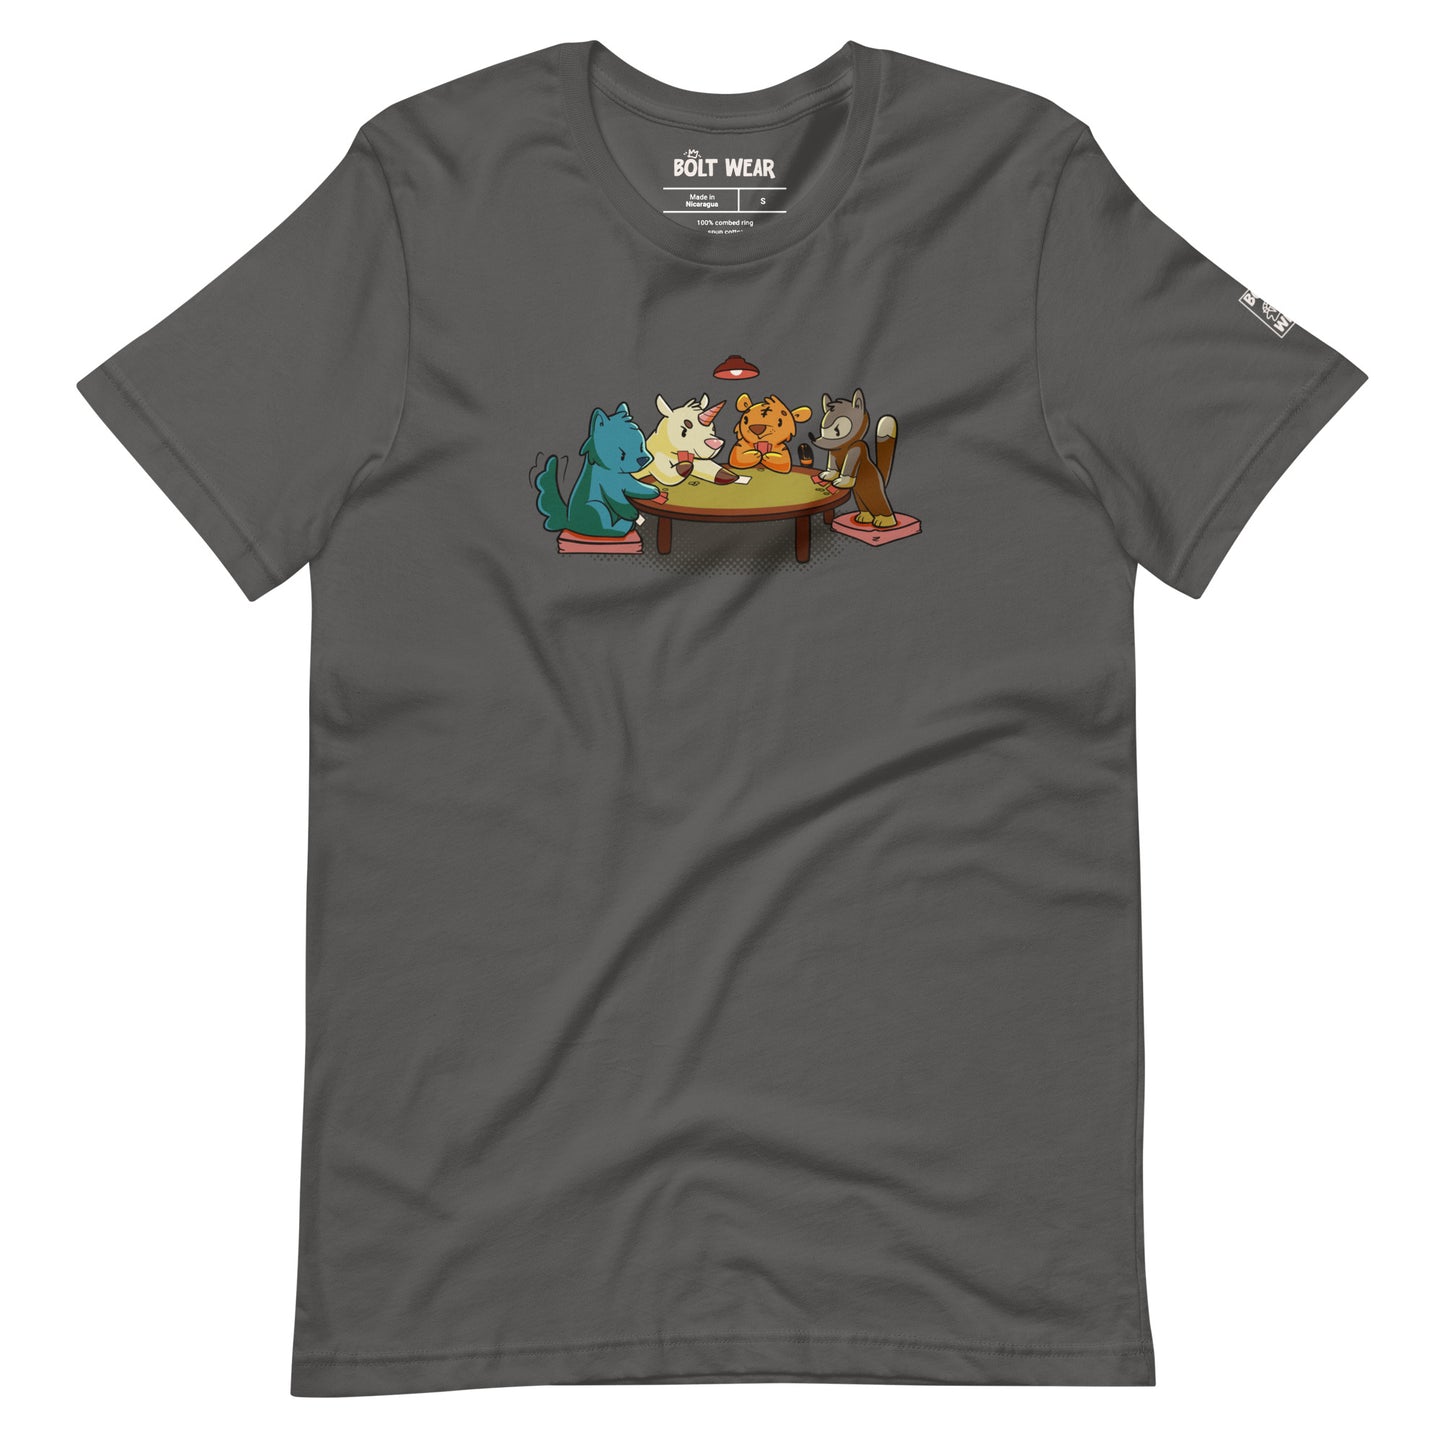 Asphalt grey t-shirt featuring 4 animals, a wolf, a unicorn, a tiger, and a racoon, playing cards around a table